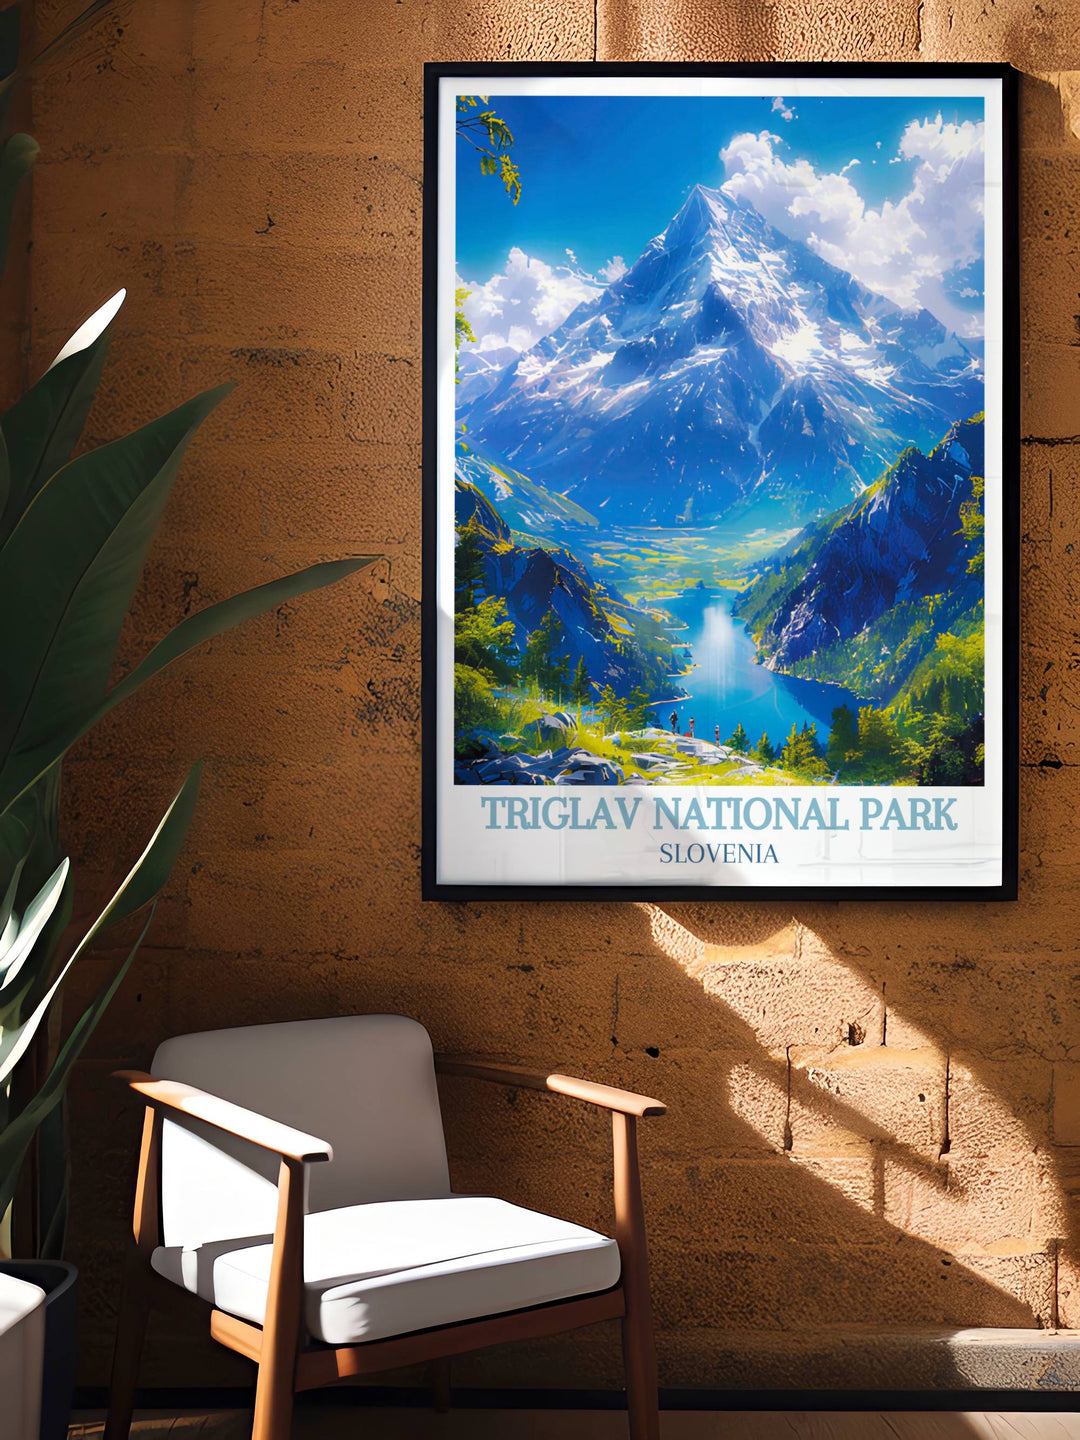 Stunning canvas art of Triglav National Park, with detailed depiction of Mount Triglav and the surrounding alpine landscape, perfect for adding a touch of natures grandeur to your home decor.